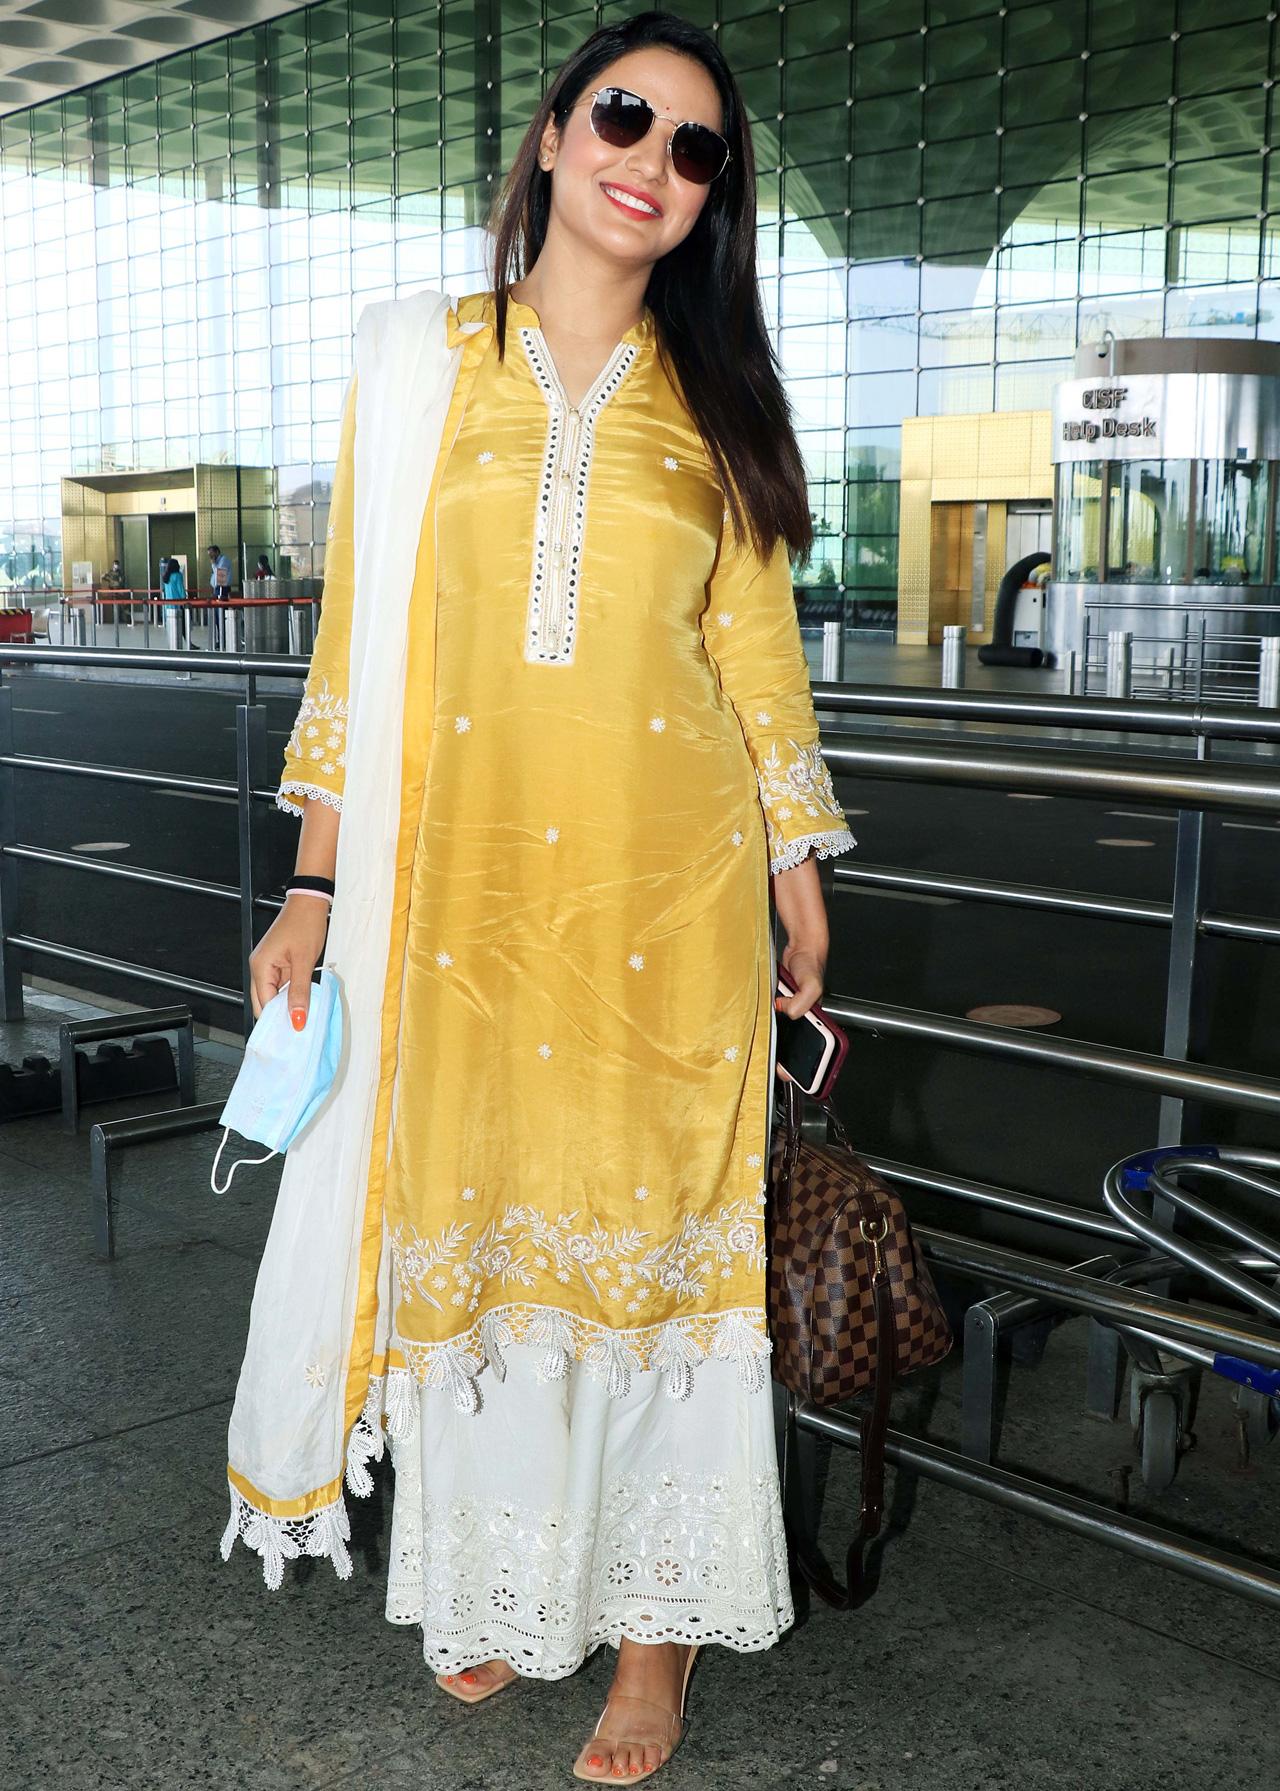 Jasmin Bhasin looked pretty in her yellow traditional attire as she arrived at the Mumbai airport. The Bigg Boss 14 contestant was all smiles as she posed for the photographers.